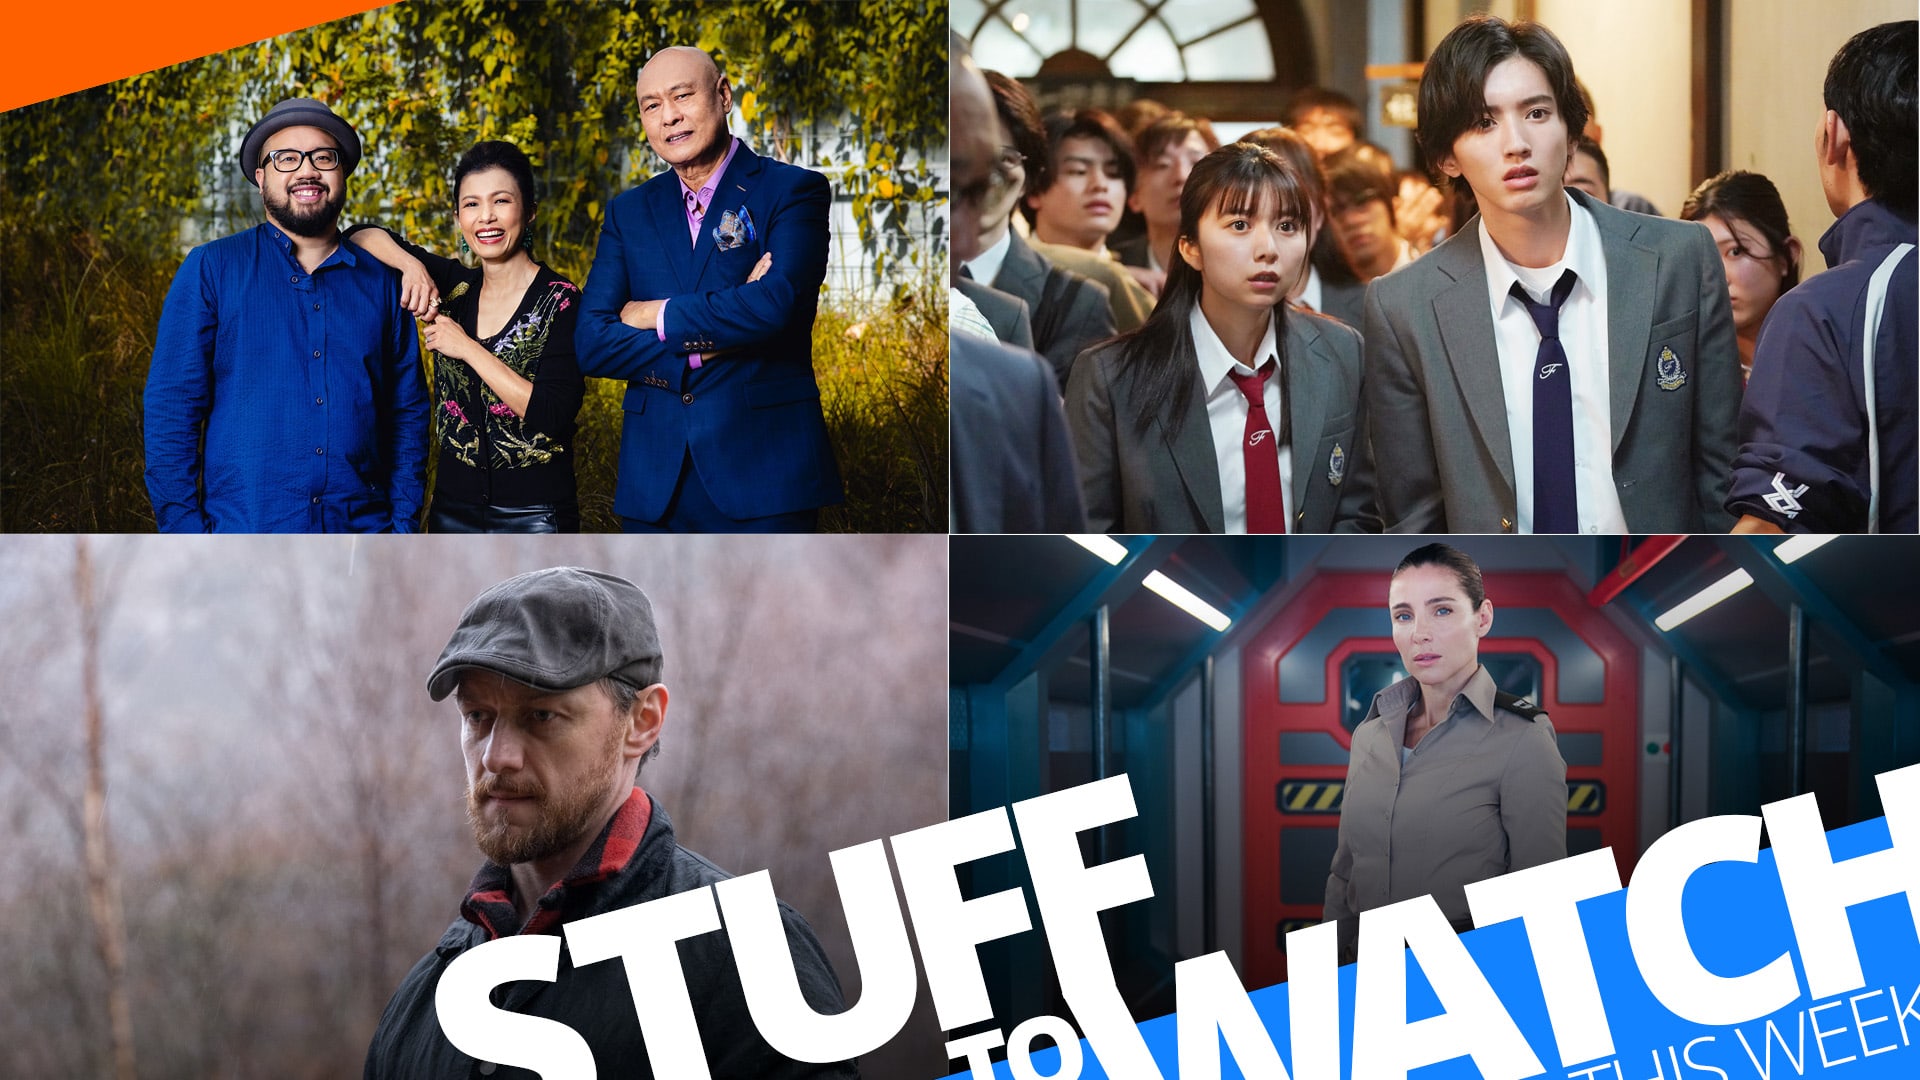 Stuff To Watch This Week (May 30-June 5, 2022)